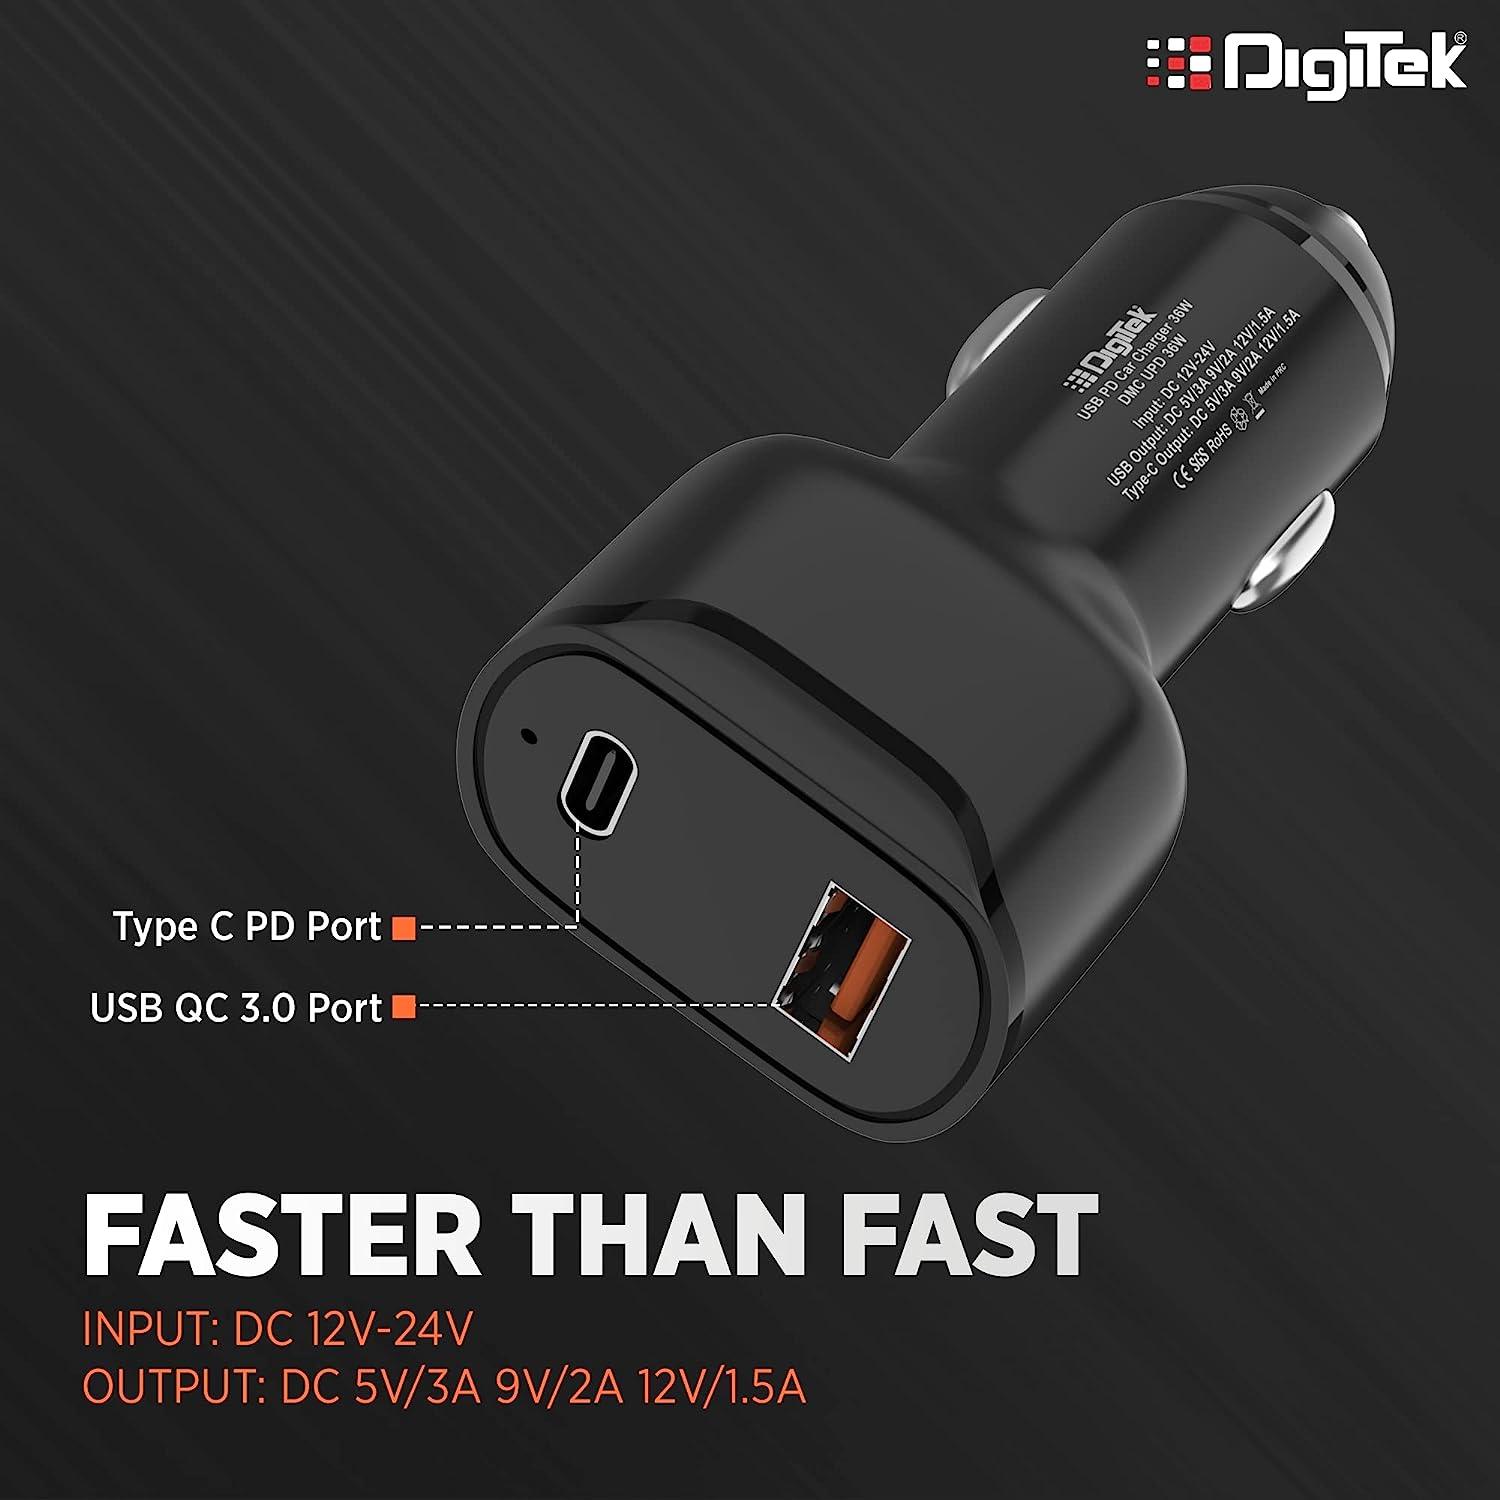 Digitek (DMC UPD 36W, Black) Cellular Phones Qc Pd 36W Car Charger With Quick Charge 3.0 And Power Delivery, Type-C & Usb Port With Wide Compatibility (DMC UPD 36W, Black) - Digitek